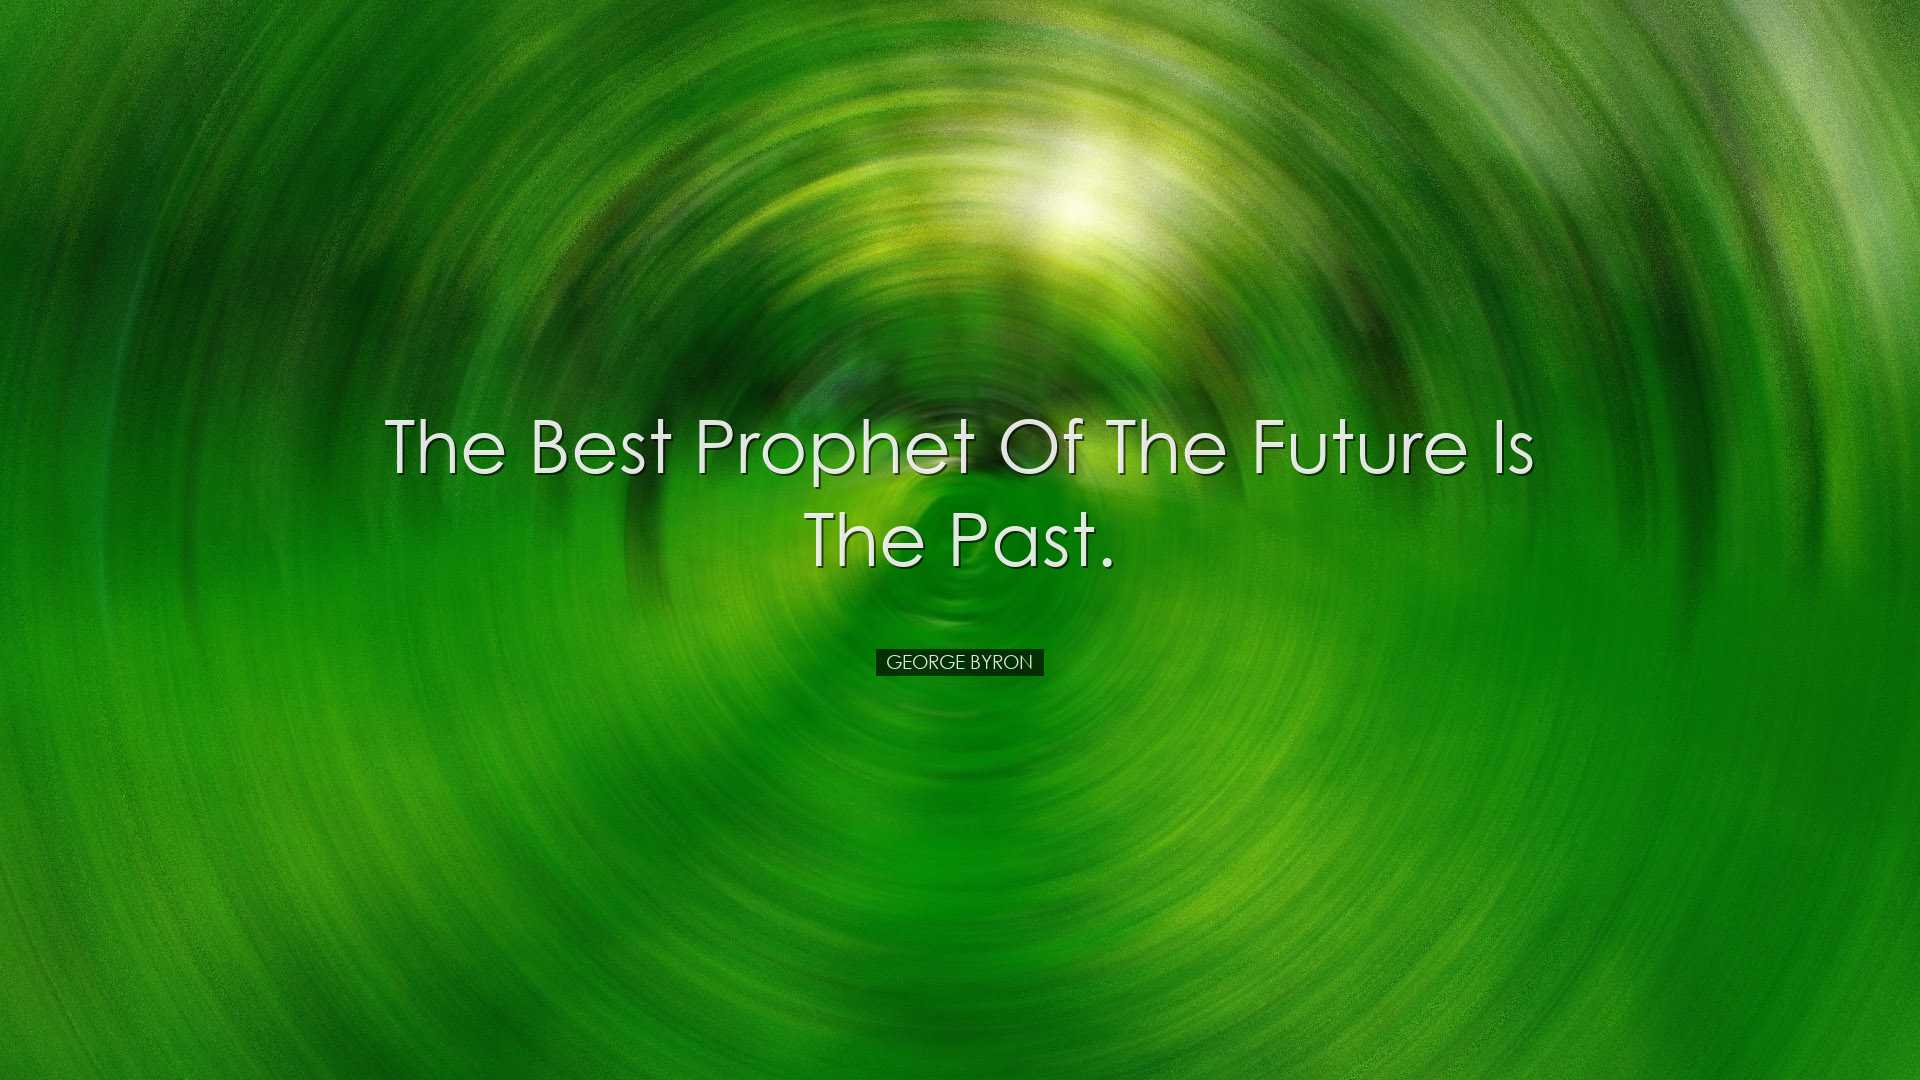 The best prophet of the future is the past. - George Byron